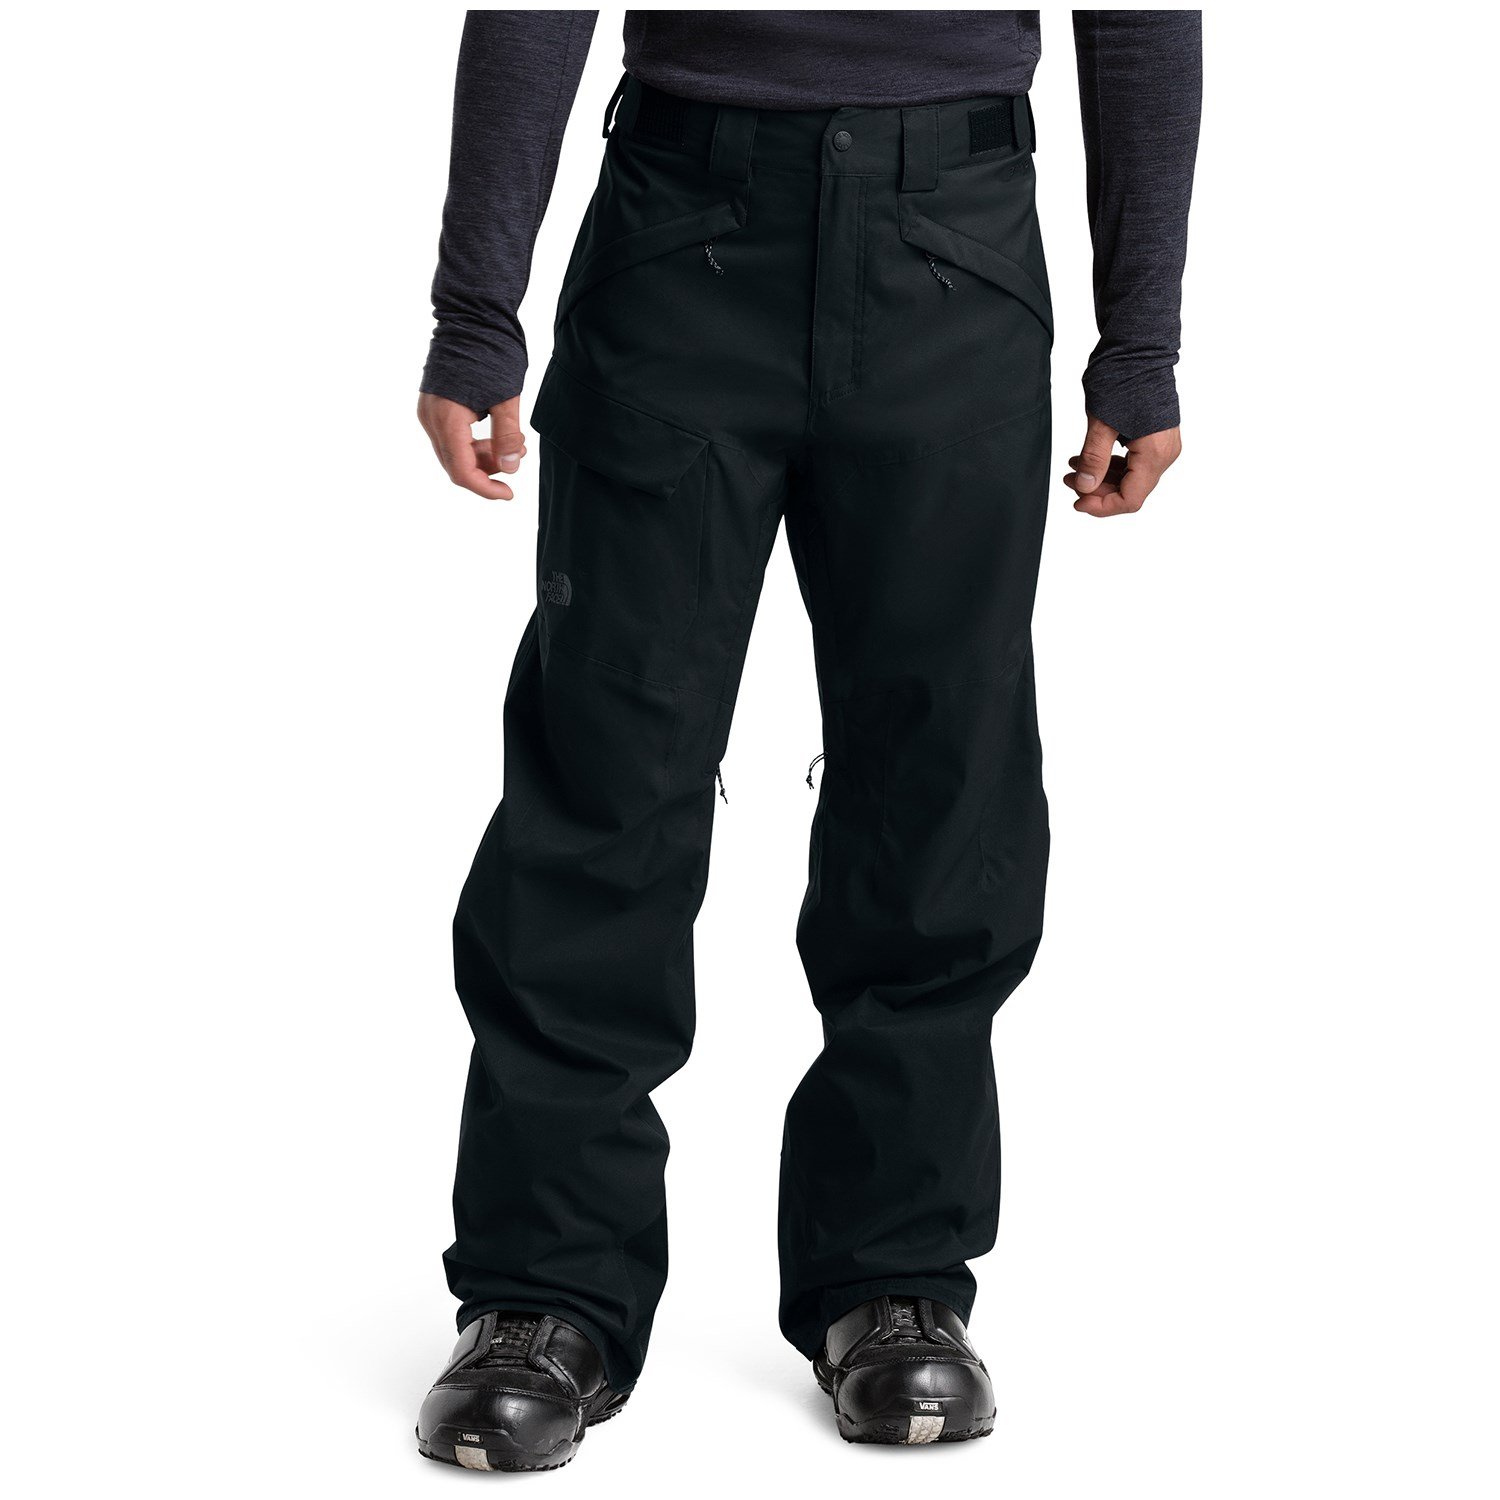 Pant The North Face Sale, SAVE 55%.